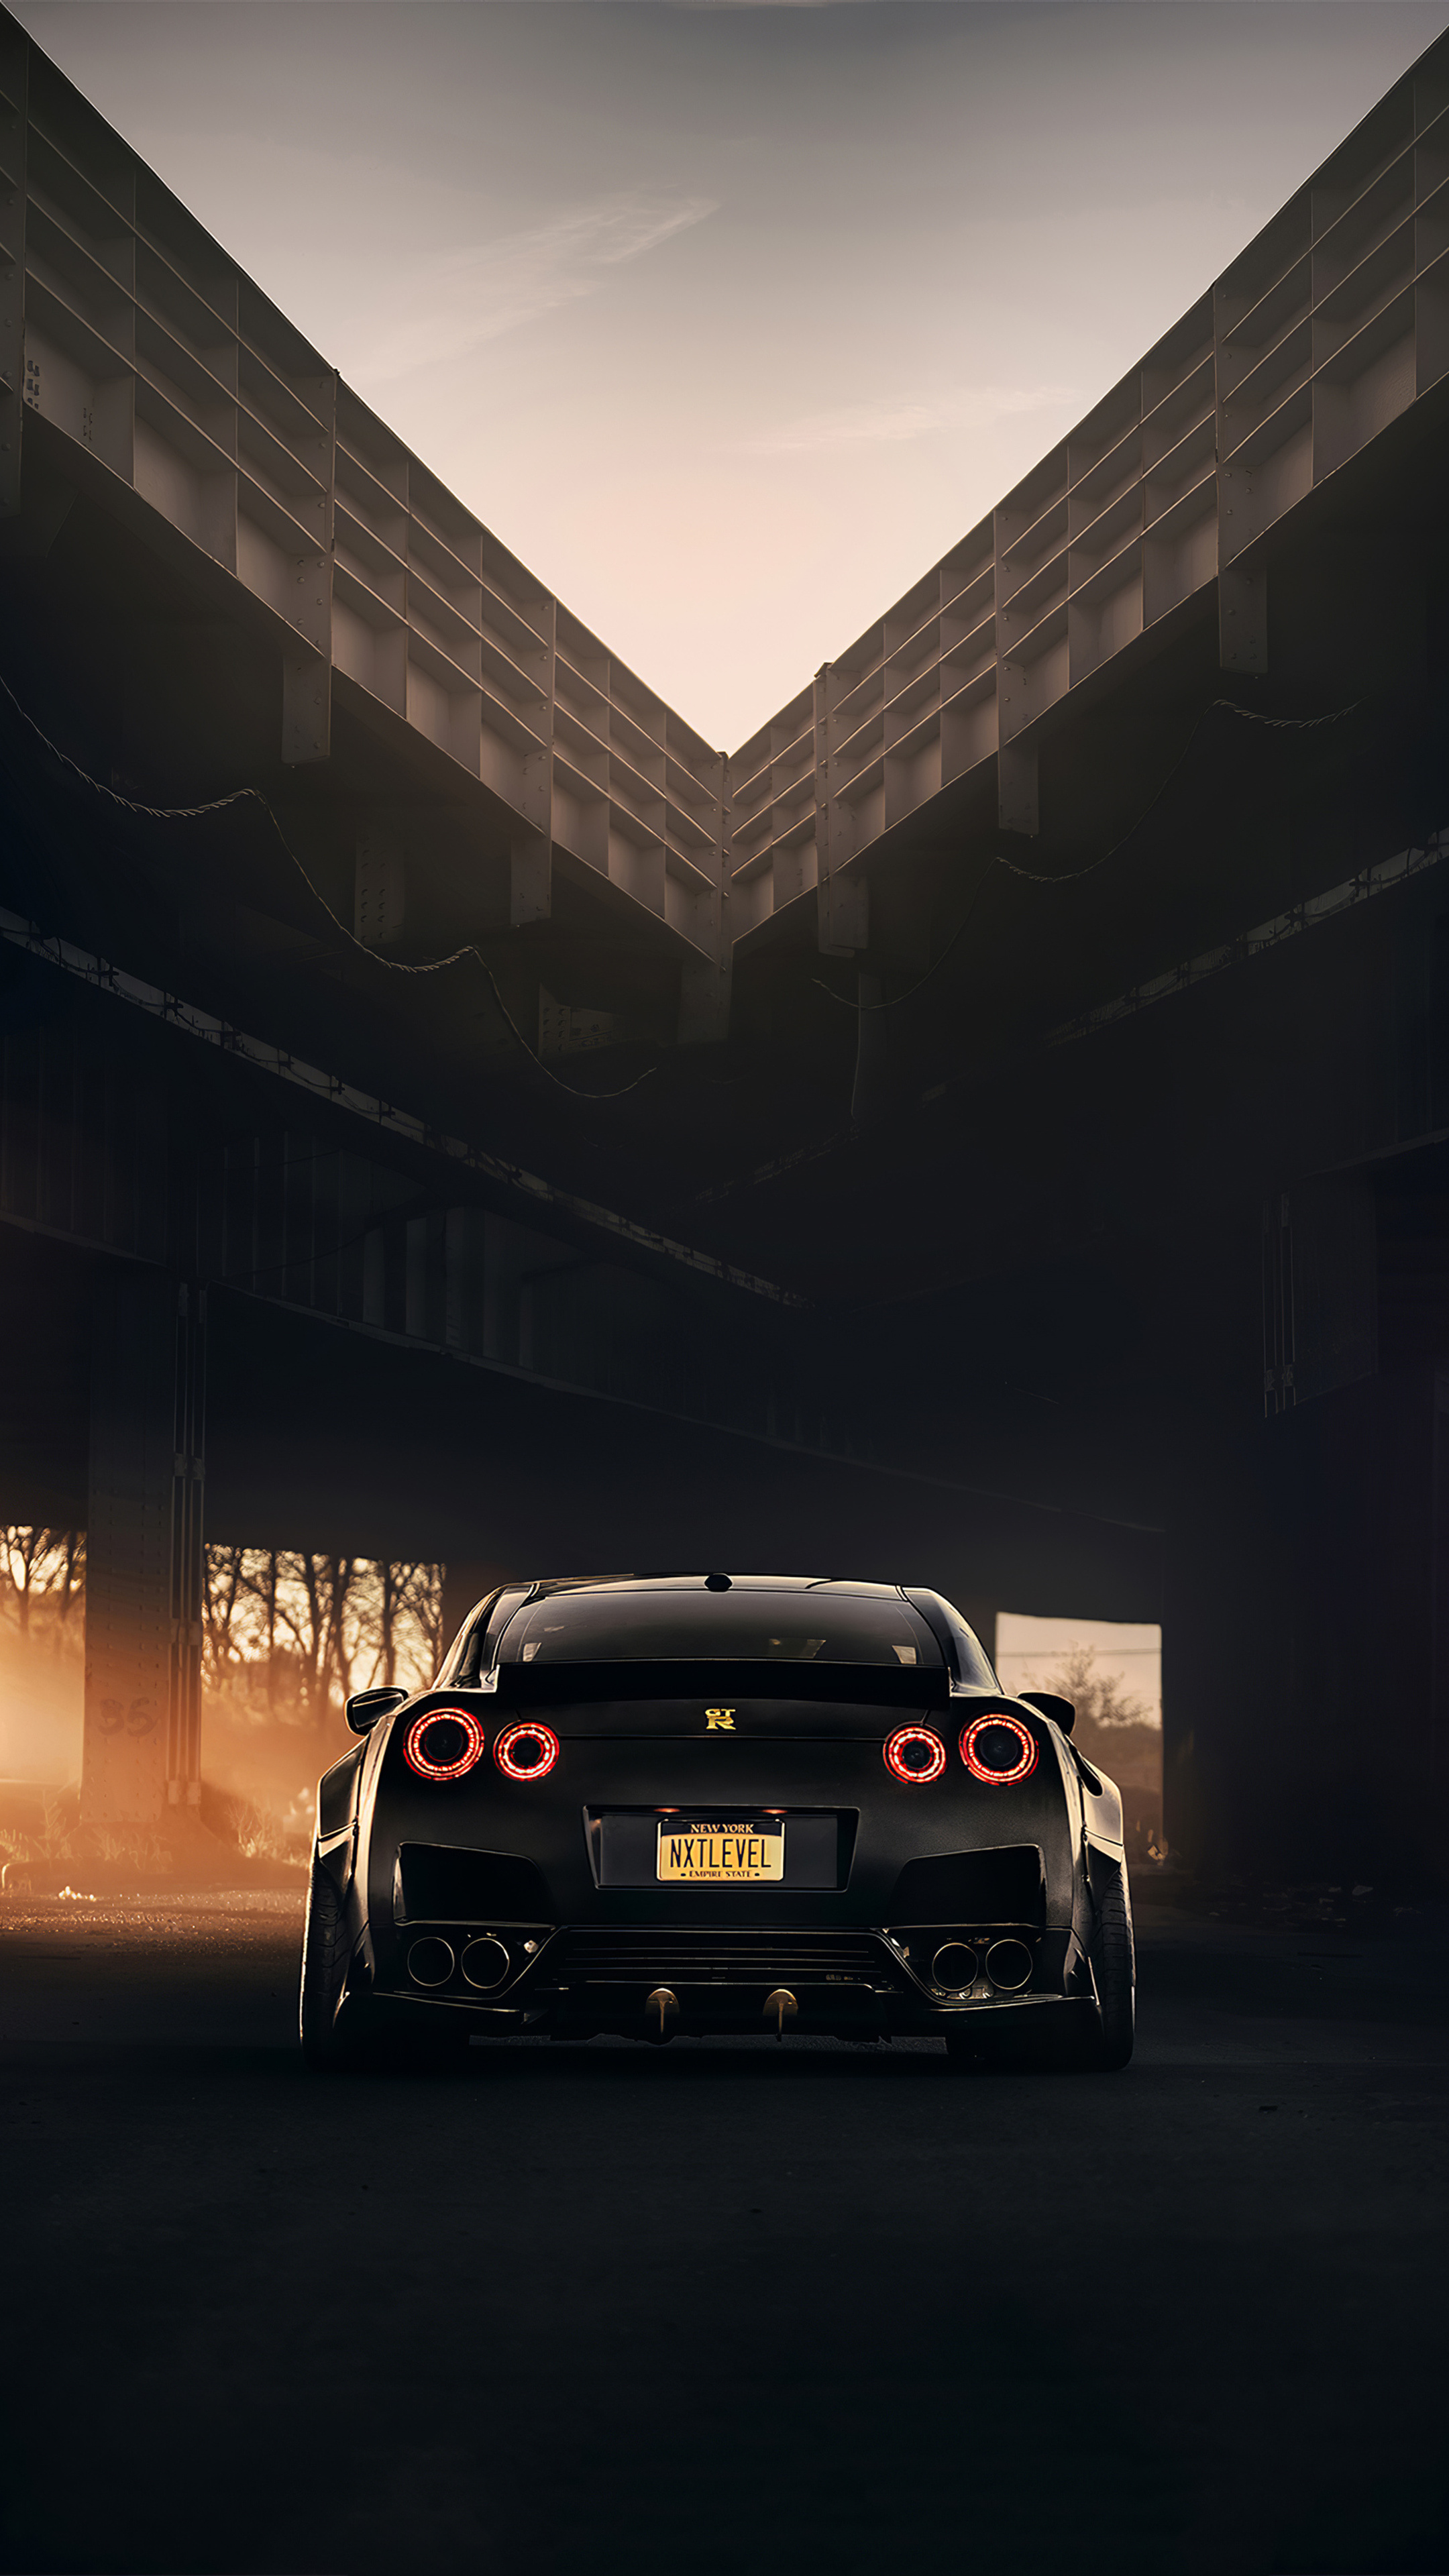 Nissan GT-R, Black beauty, Sony Xperia delight, Unforgettable sports car experience, 2160x3840 4K Phone